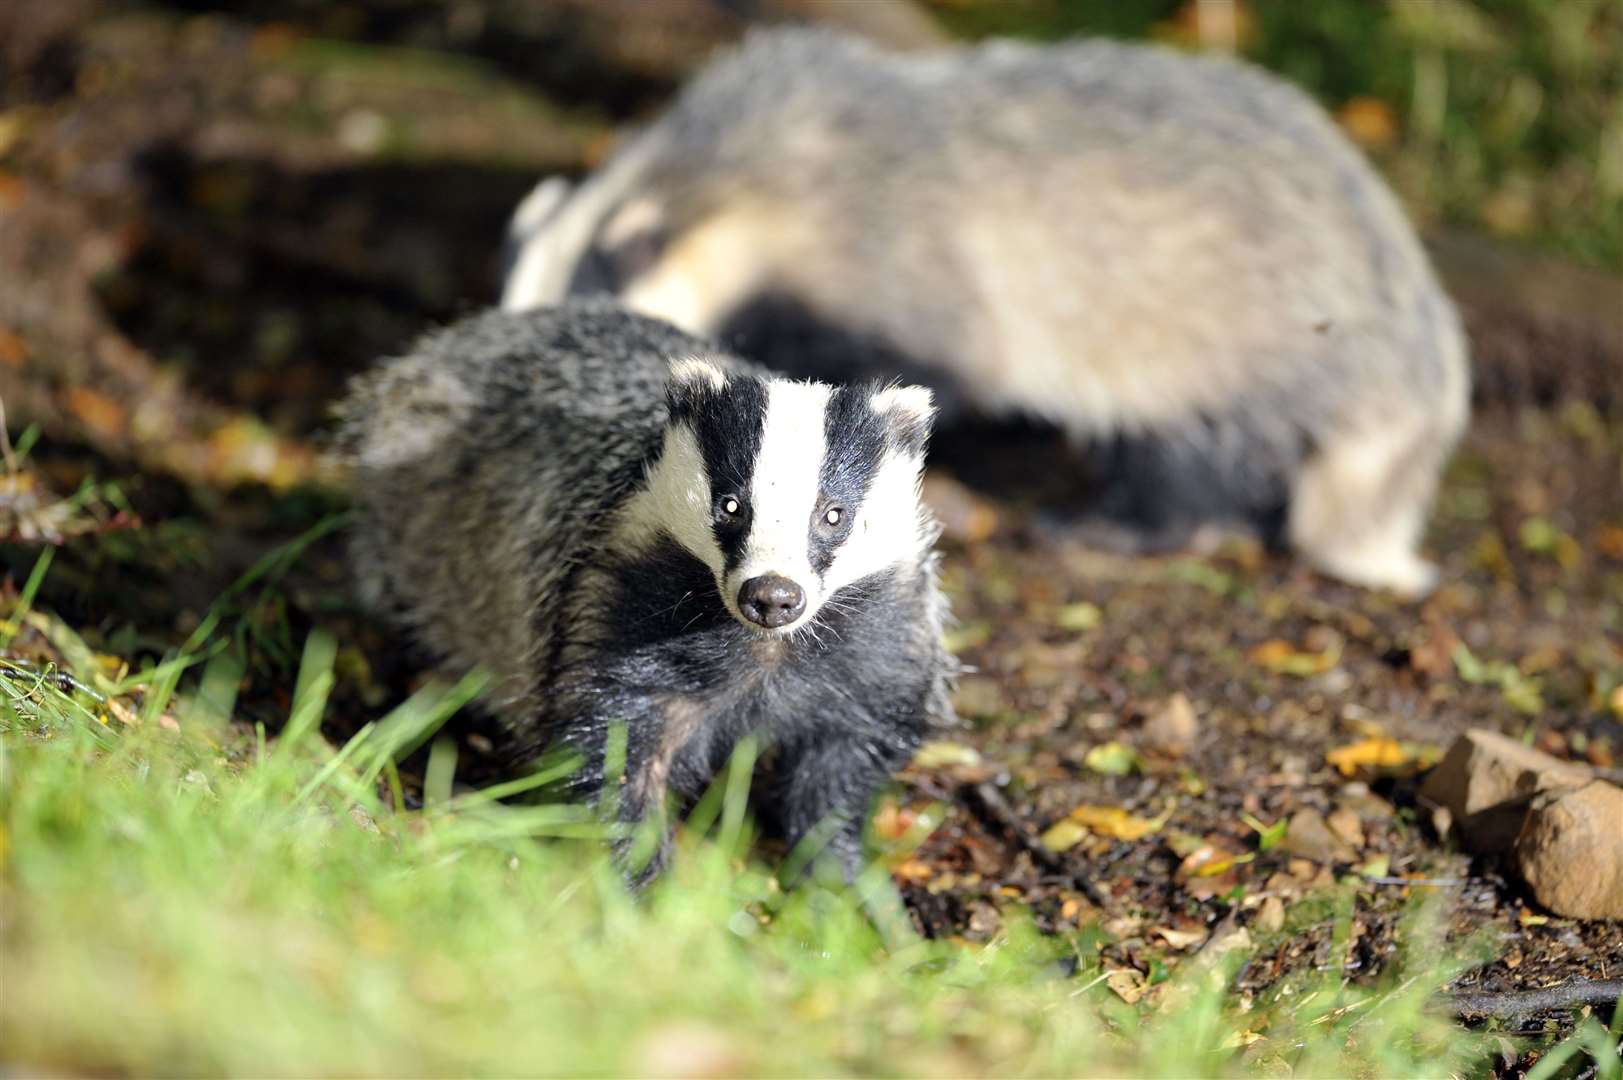 Concerns were raised about a proposed badger cull in Nottinghamshire (Ben Birchall/PA)